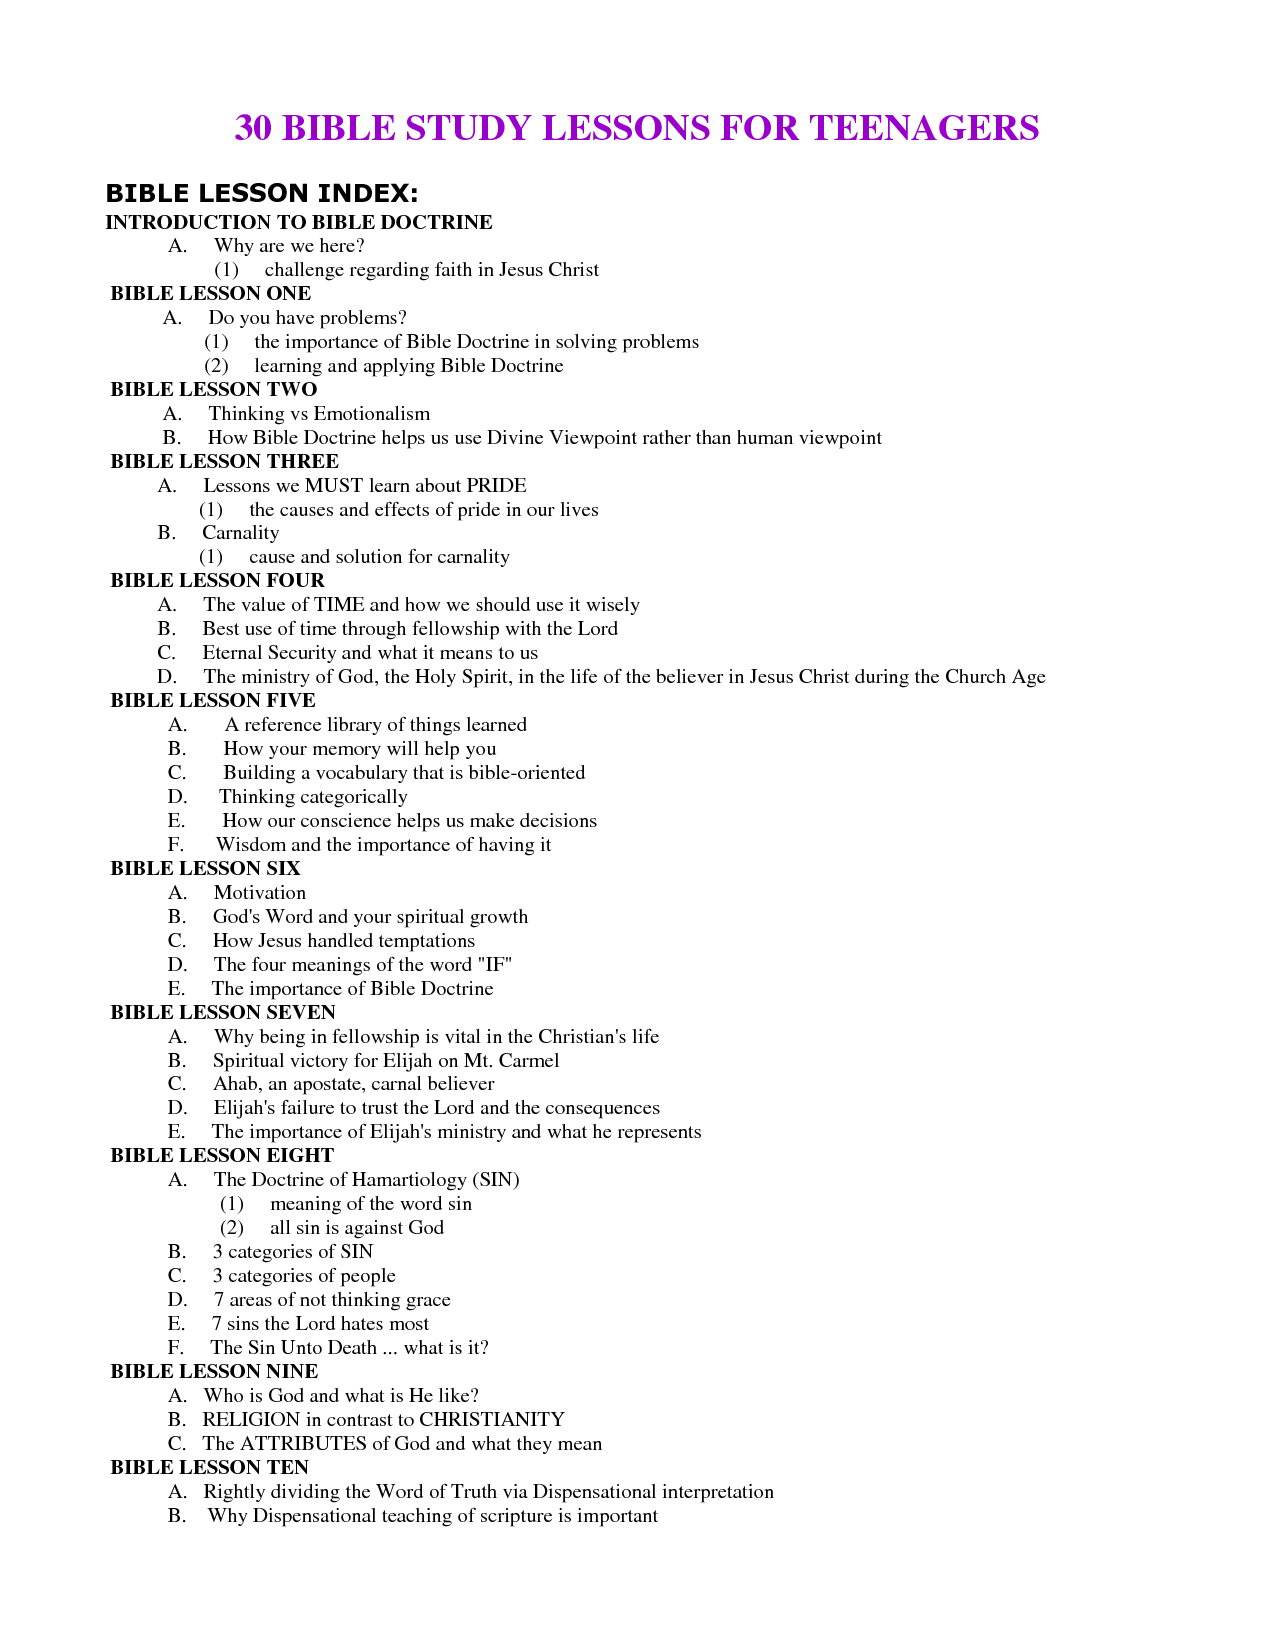 15-best-images-of-printable-teen-bible-study-worksheets-free